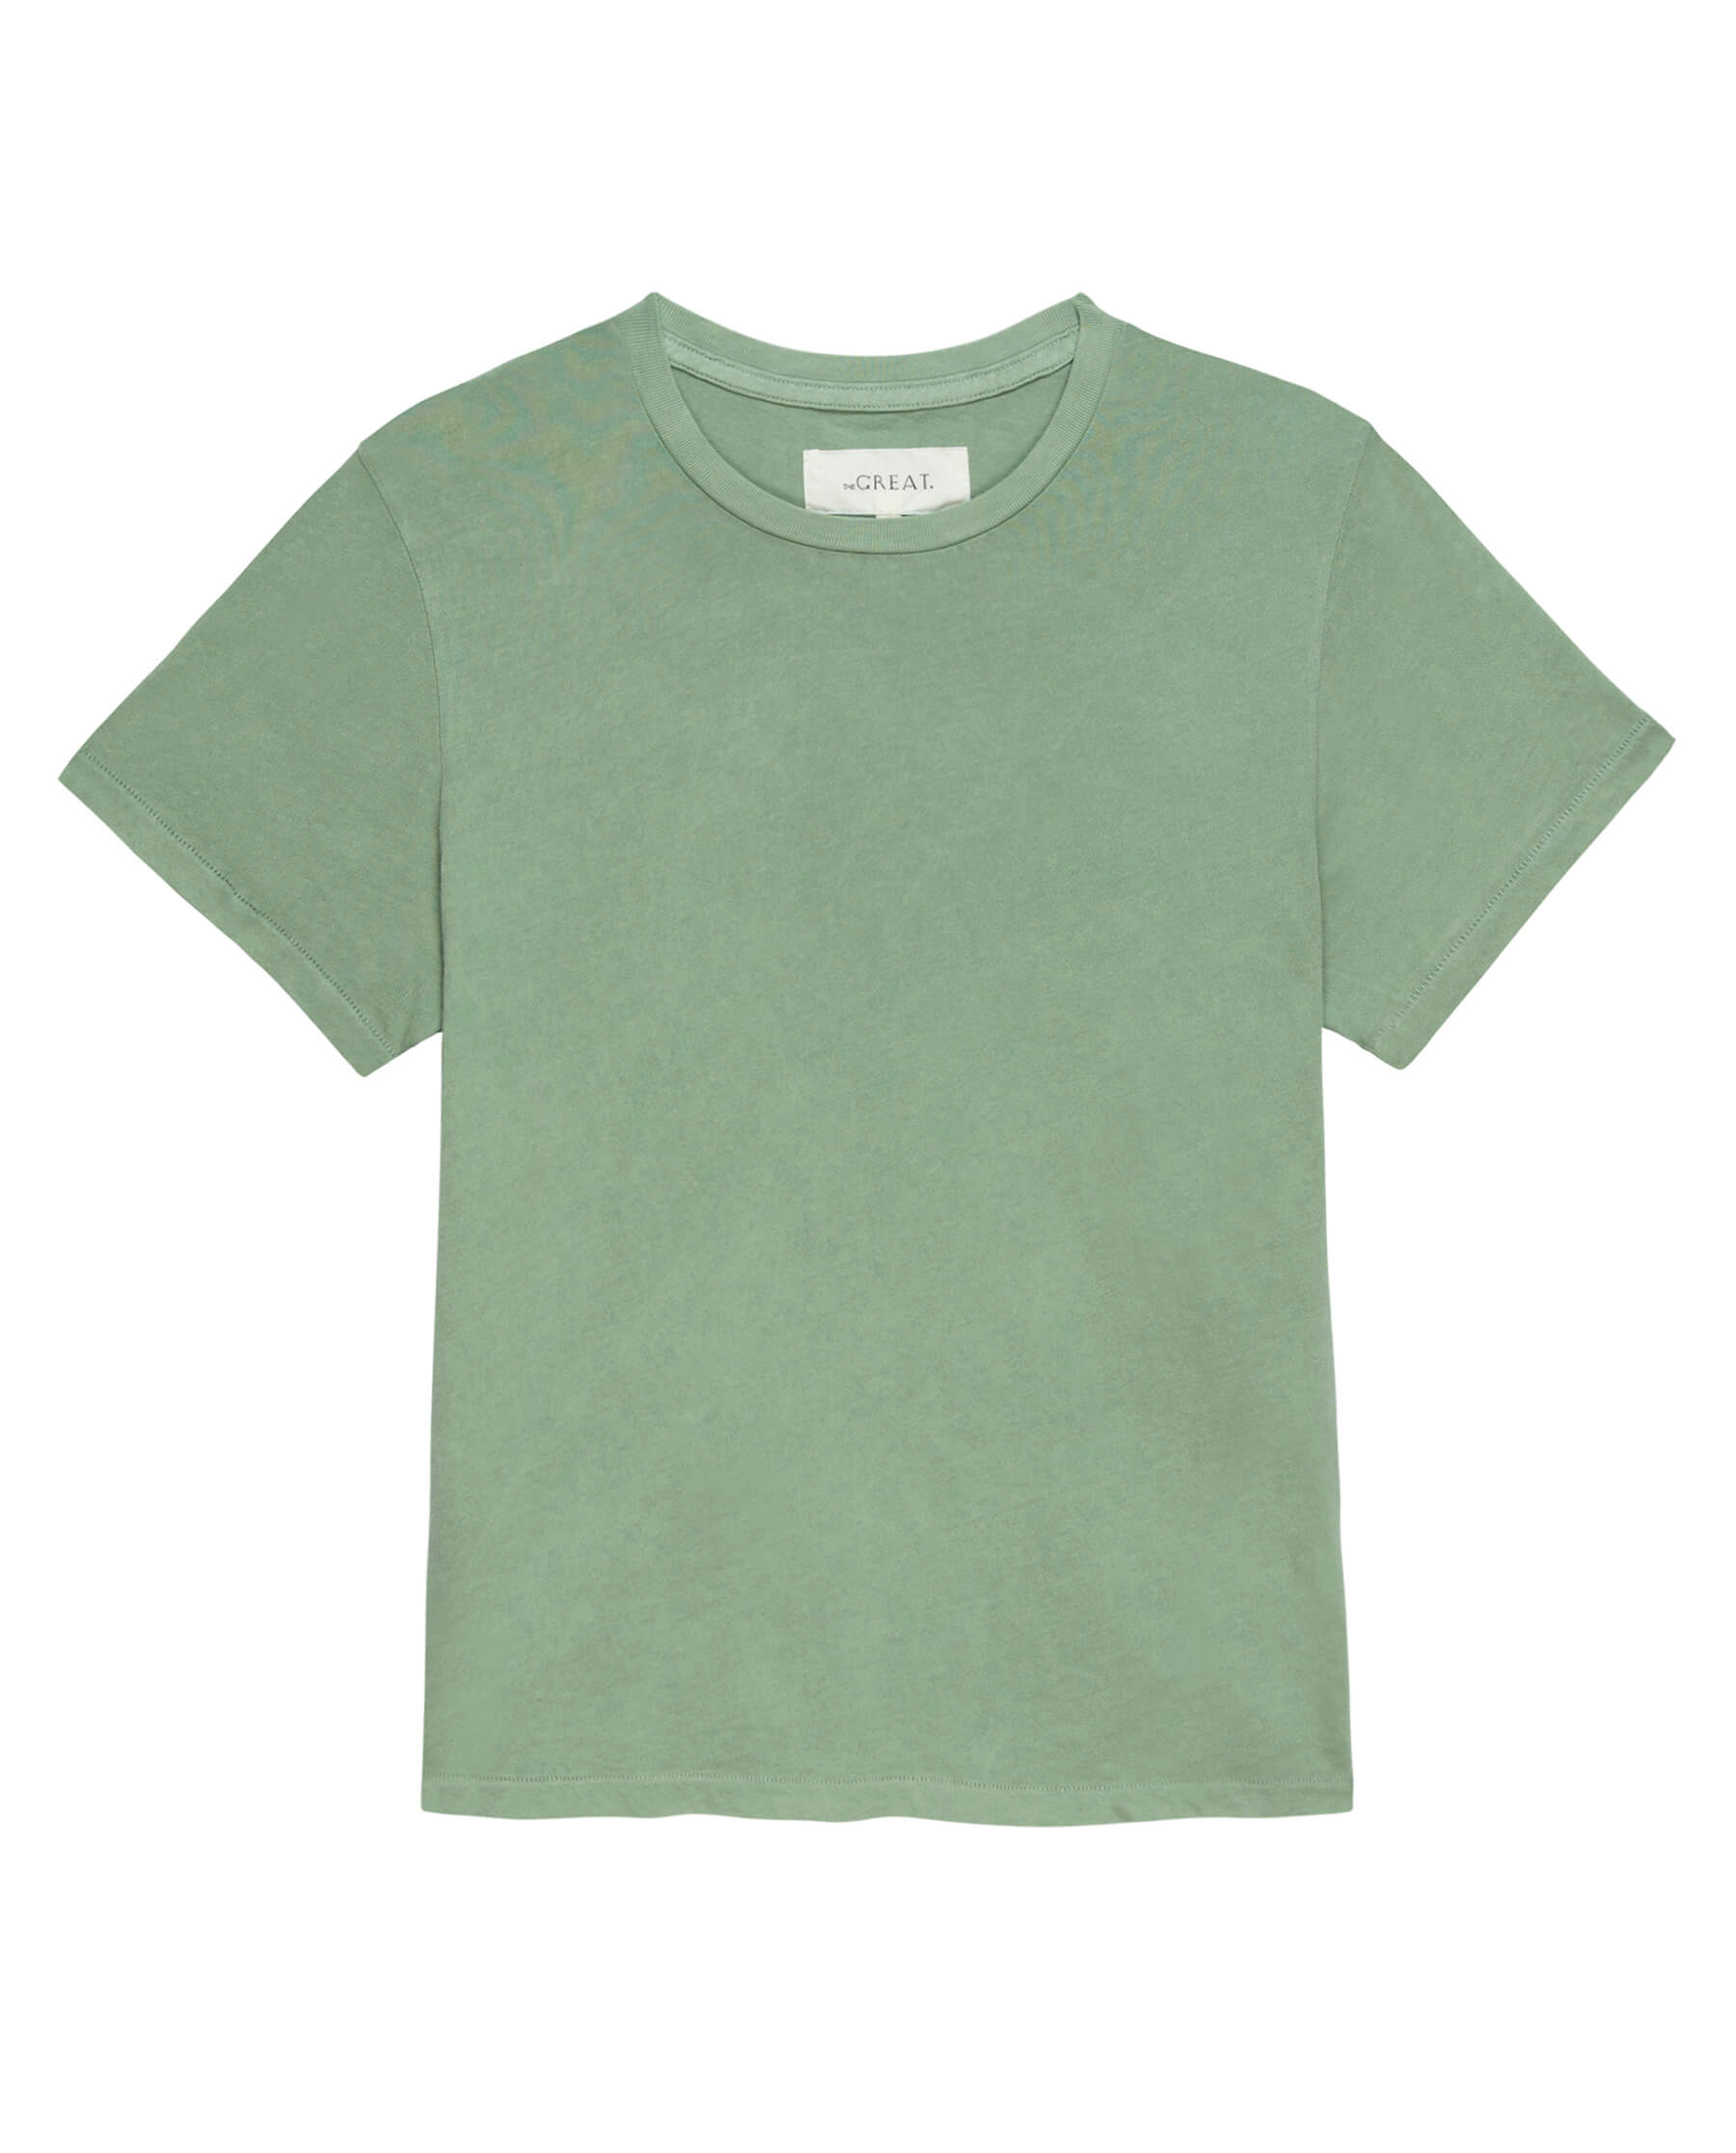 The Little Tee. Solid -- Pistachio